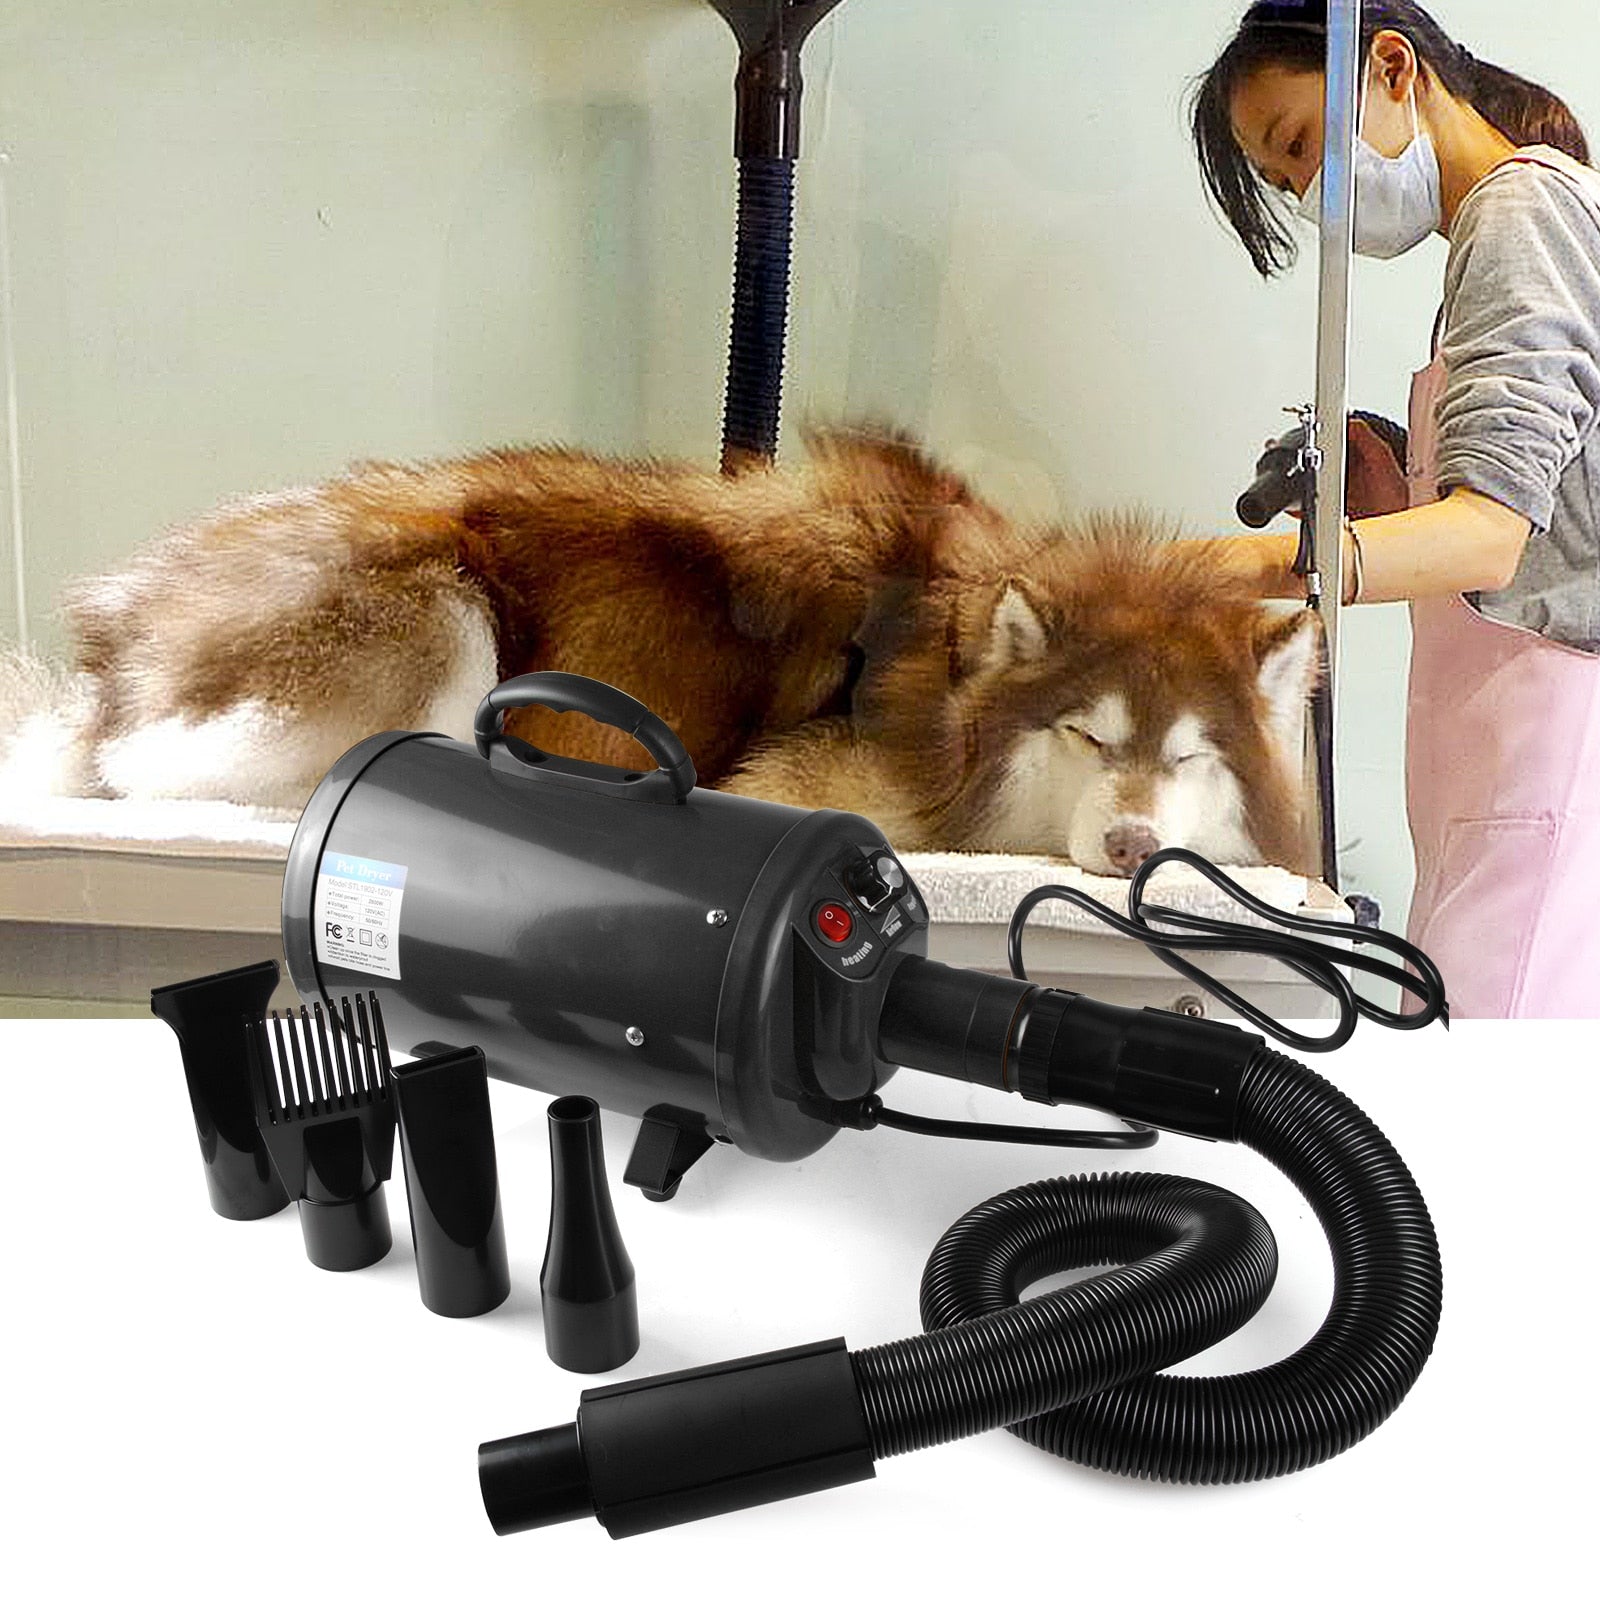 Hair Dryer For Dogs